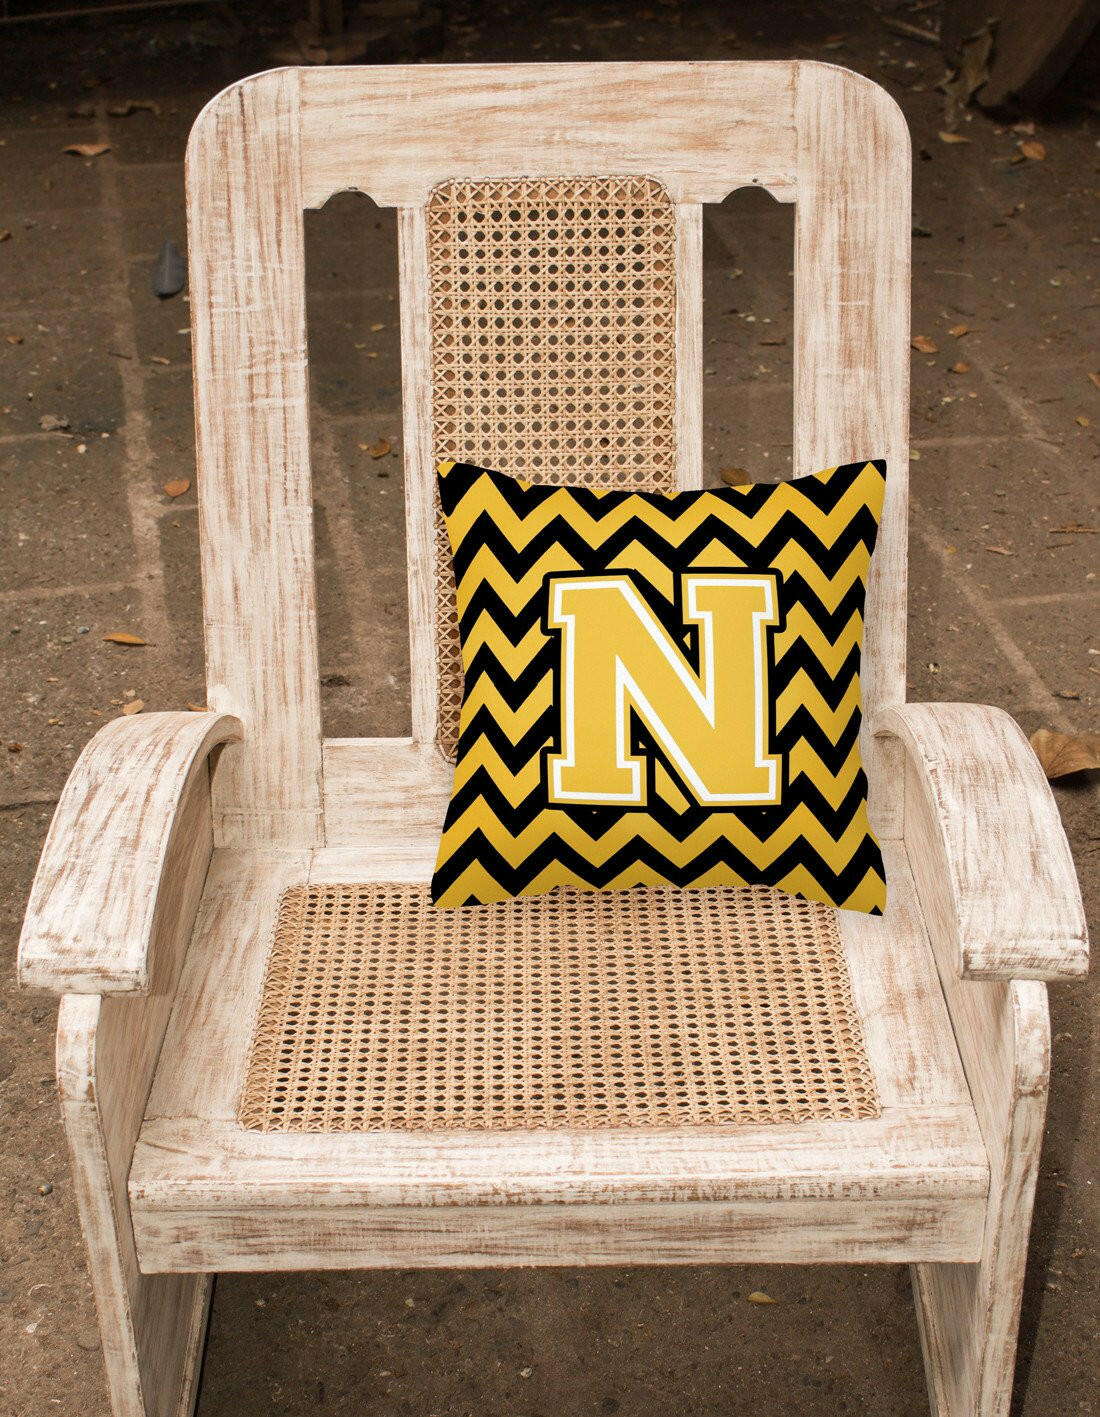 Letter N Chevron Black and Gold Fabric Decorative Pillow CJ1053-NPW1414 by Caroline's Treasures